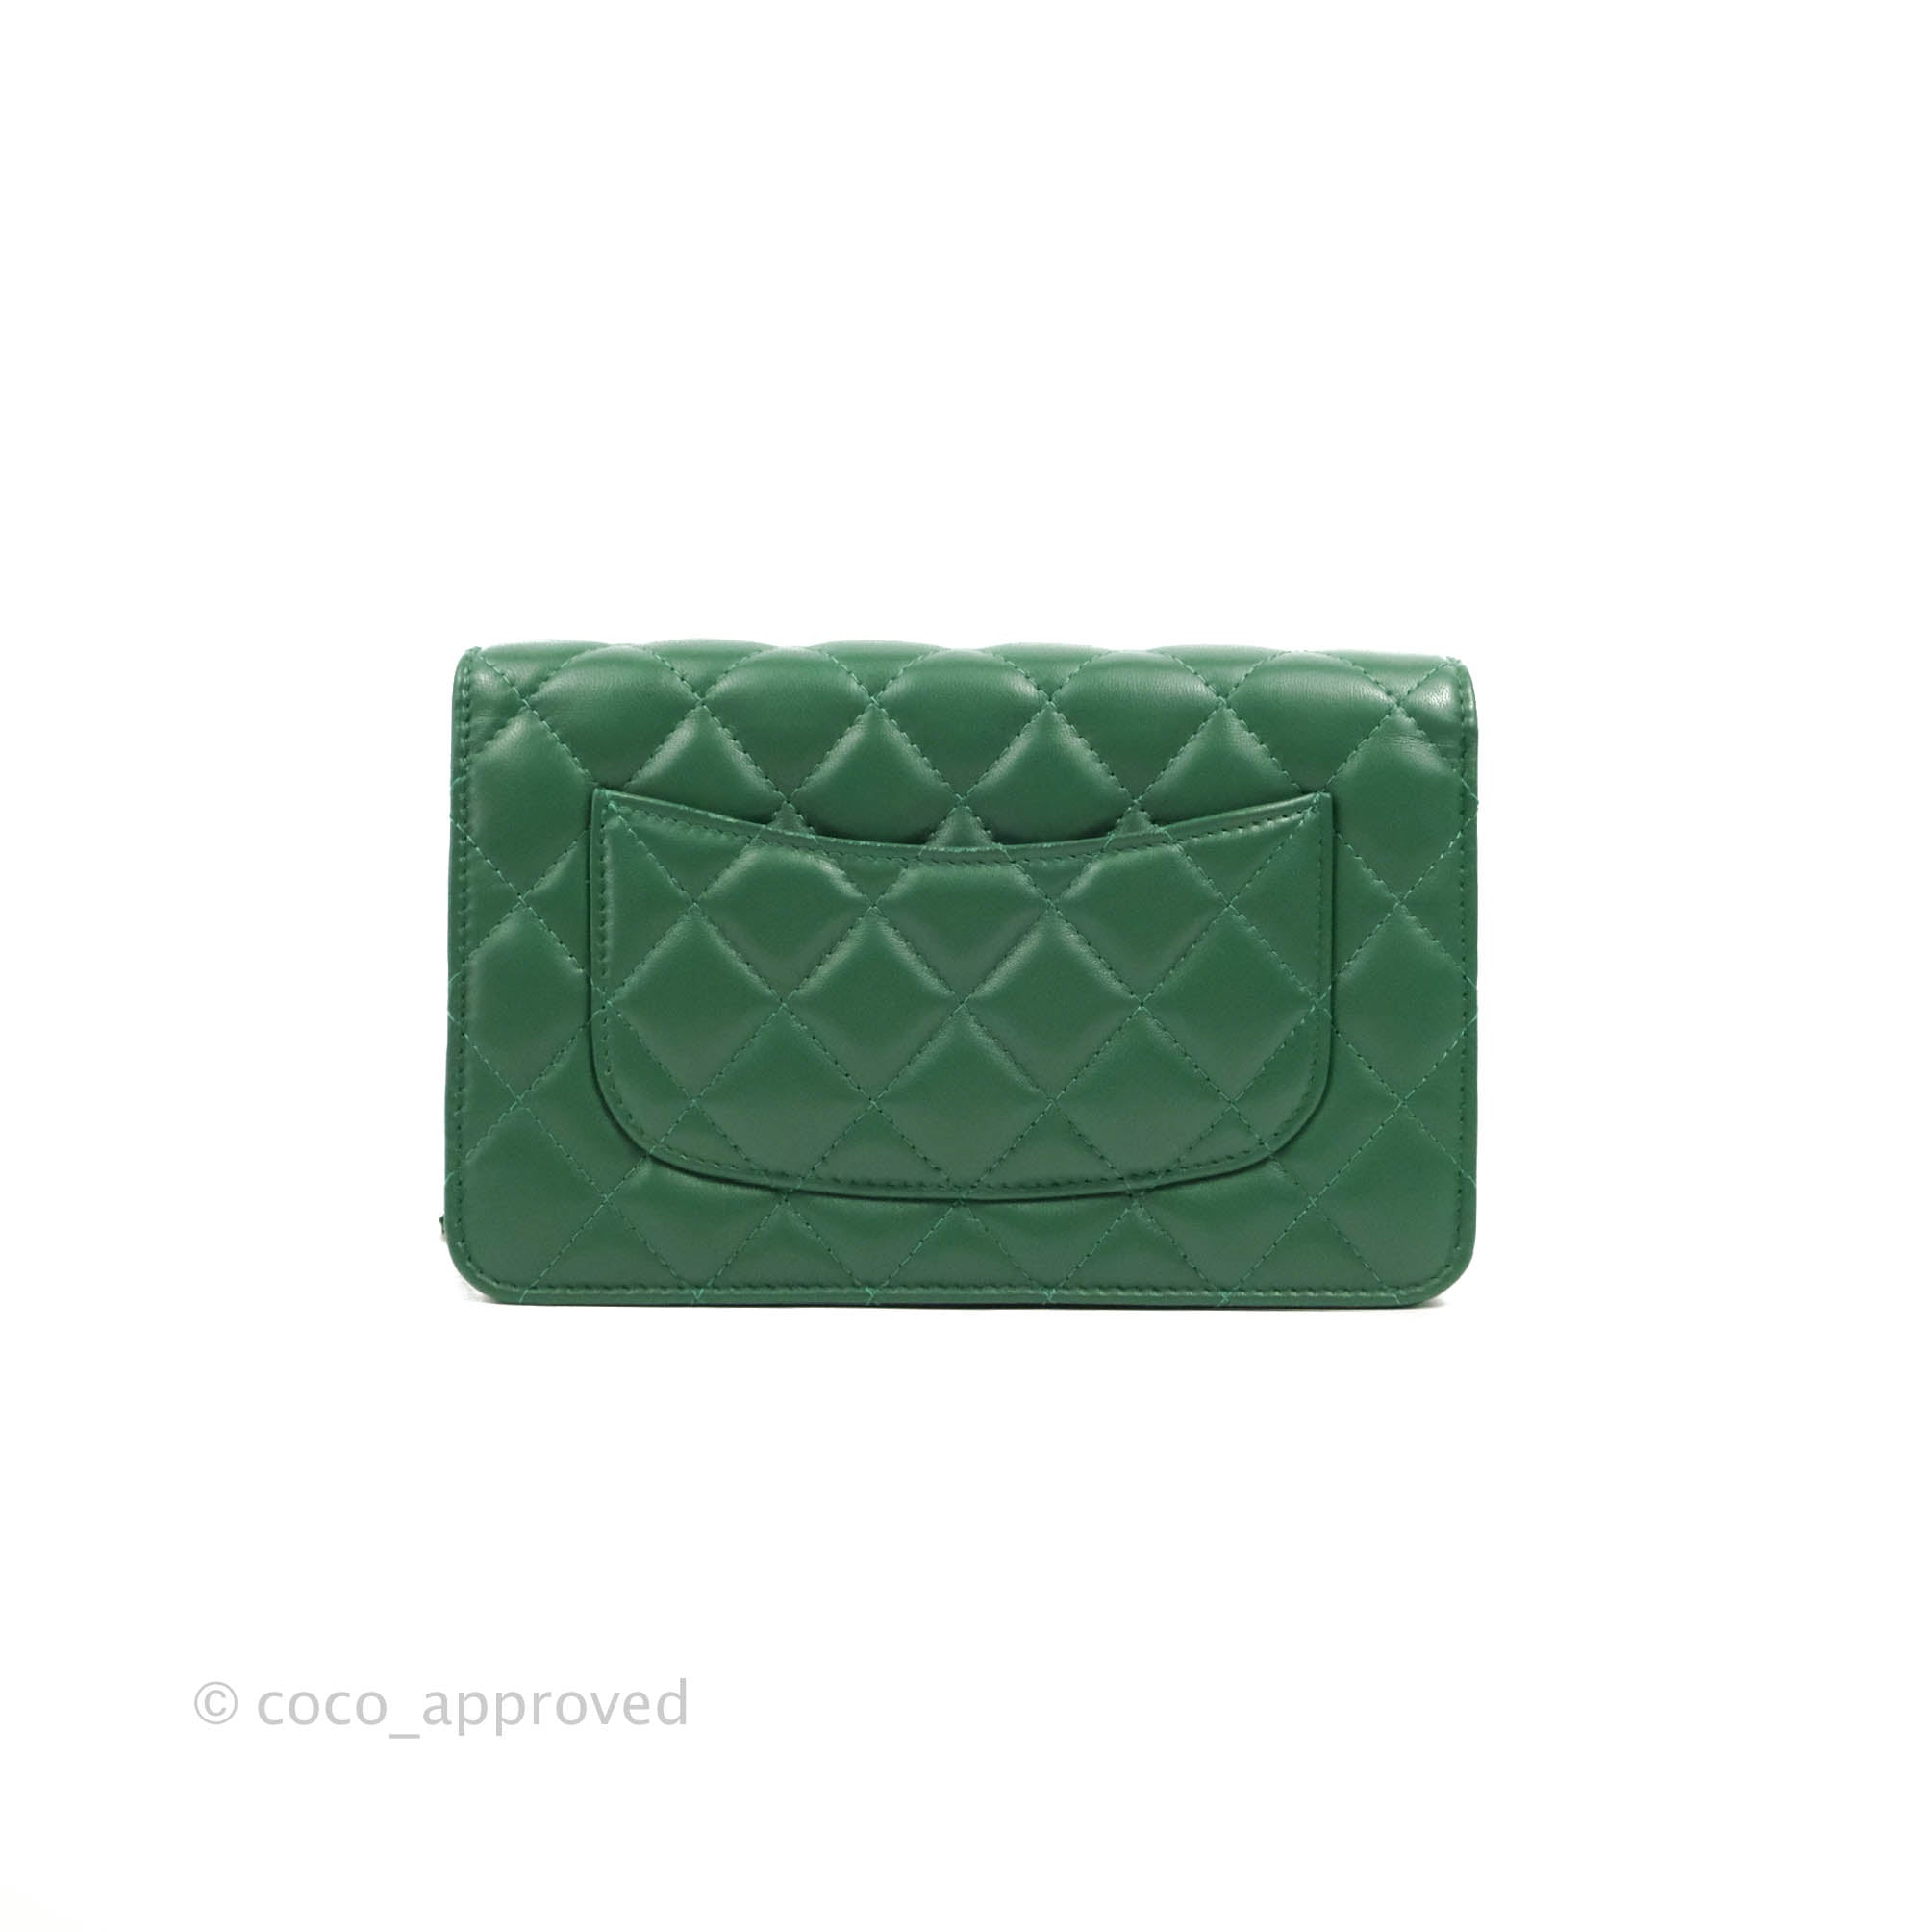 CHANEL bag, Wallet model, in dark green quilted leather,…